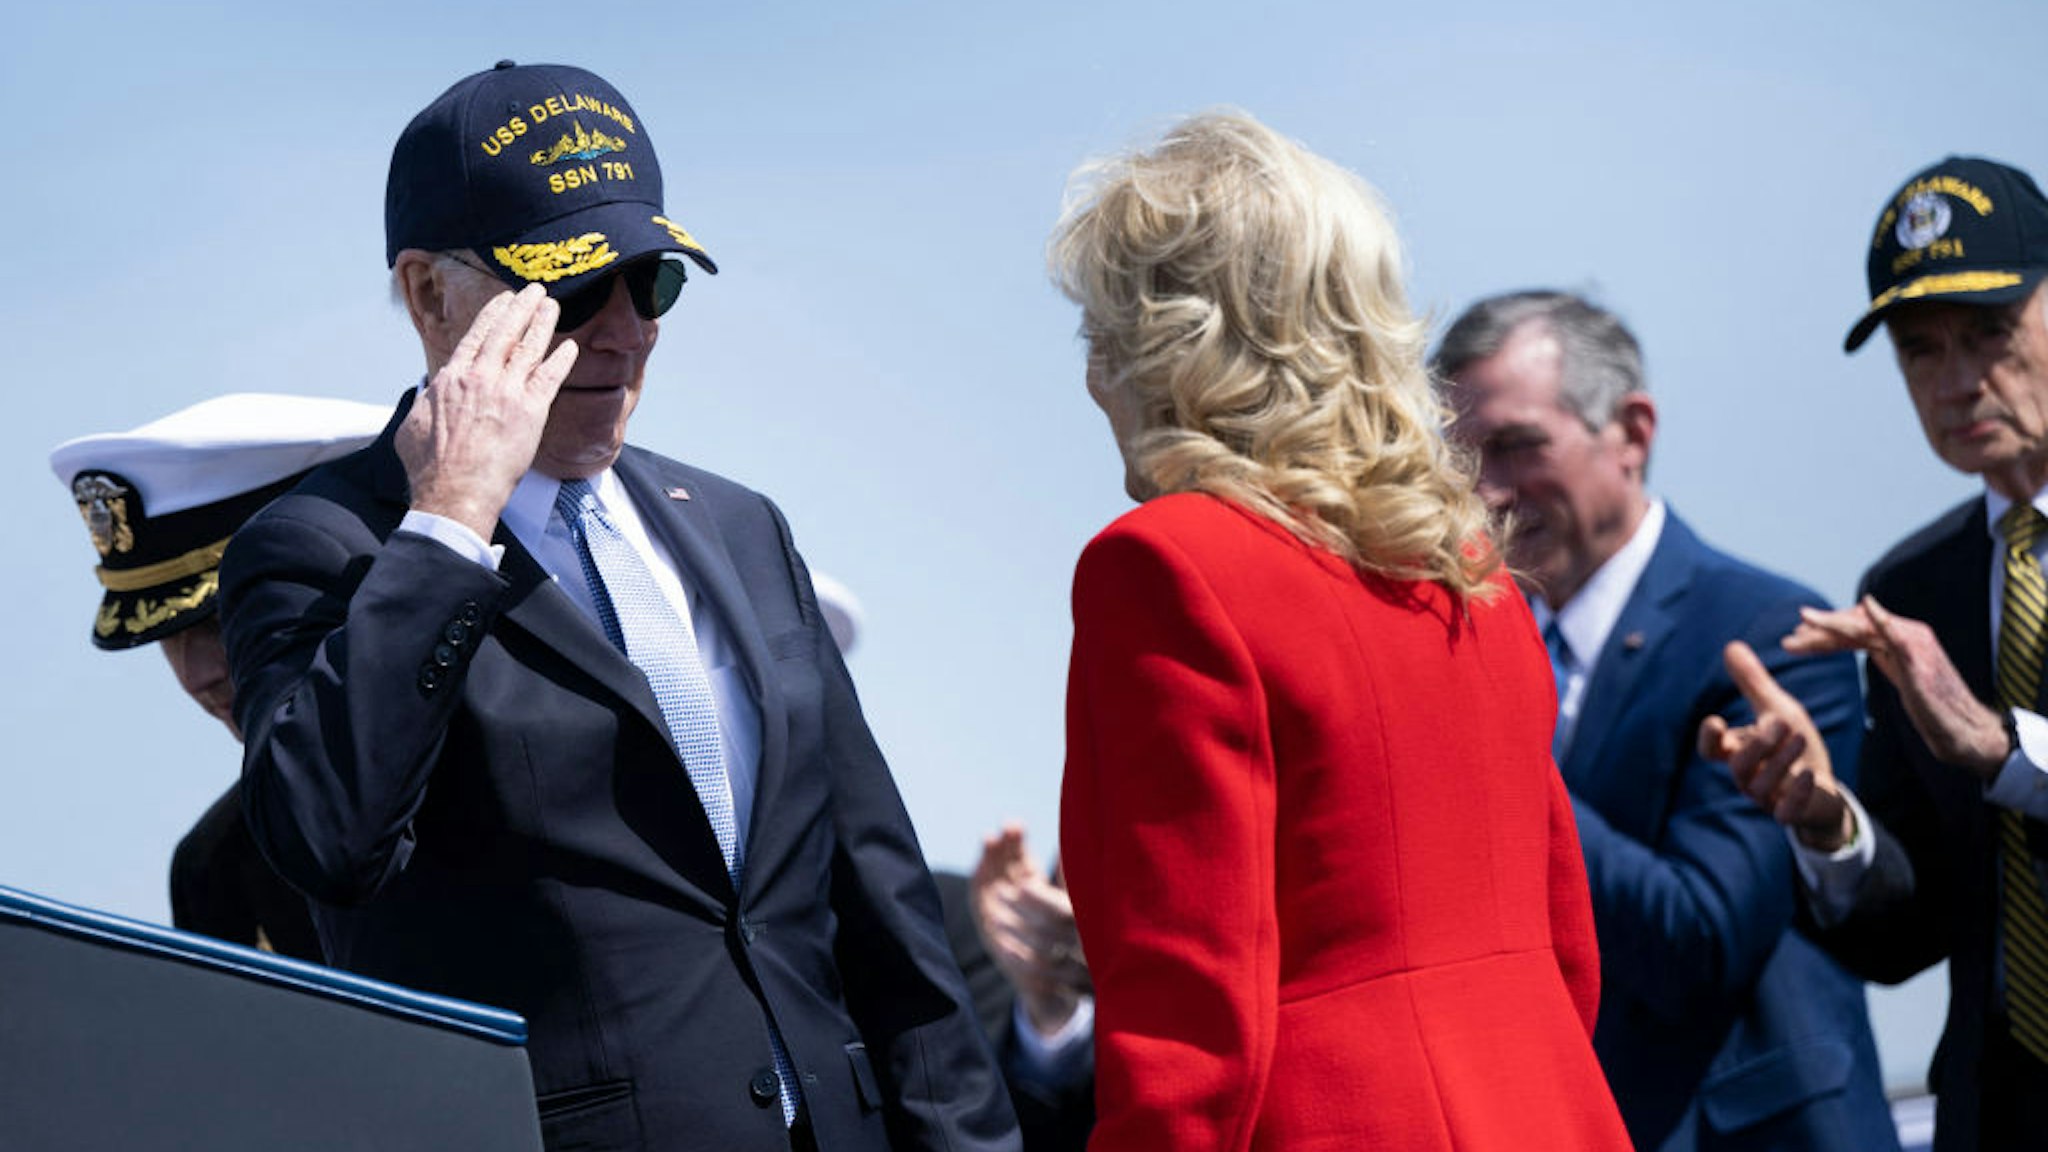 US President Joe Biden and First Lady Jill Biden attend the commissioning commemoration ceremony for the Virginia-Class submarine USS Delaware at the Port of Wilmington in Wilmington, Delaware, on April 2, 2022. (Photo by Brendan Smialowski / AFP) (Photo by BRENDAN SMIALOWSKI/AFP via Getty Images)